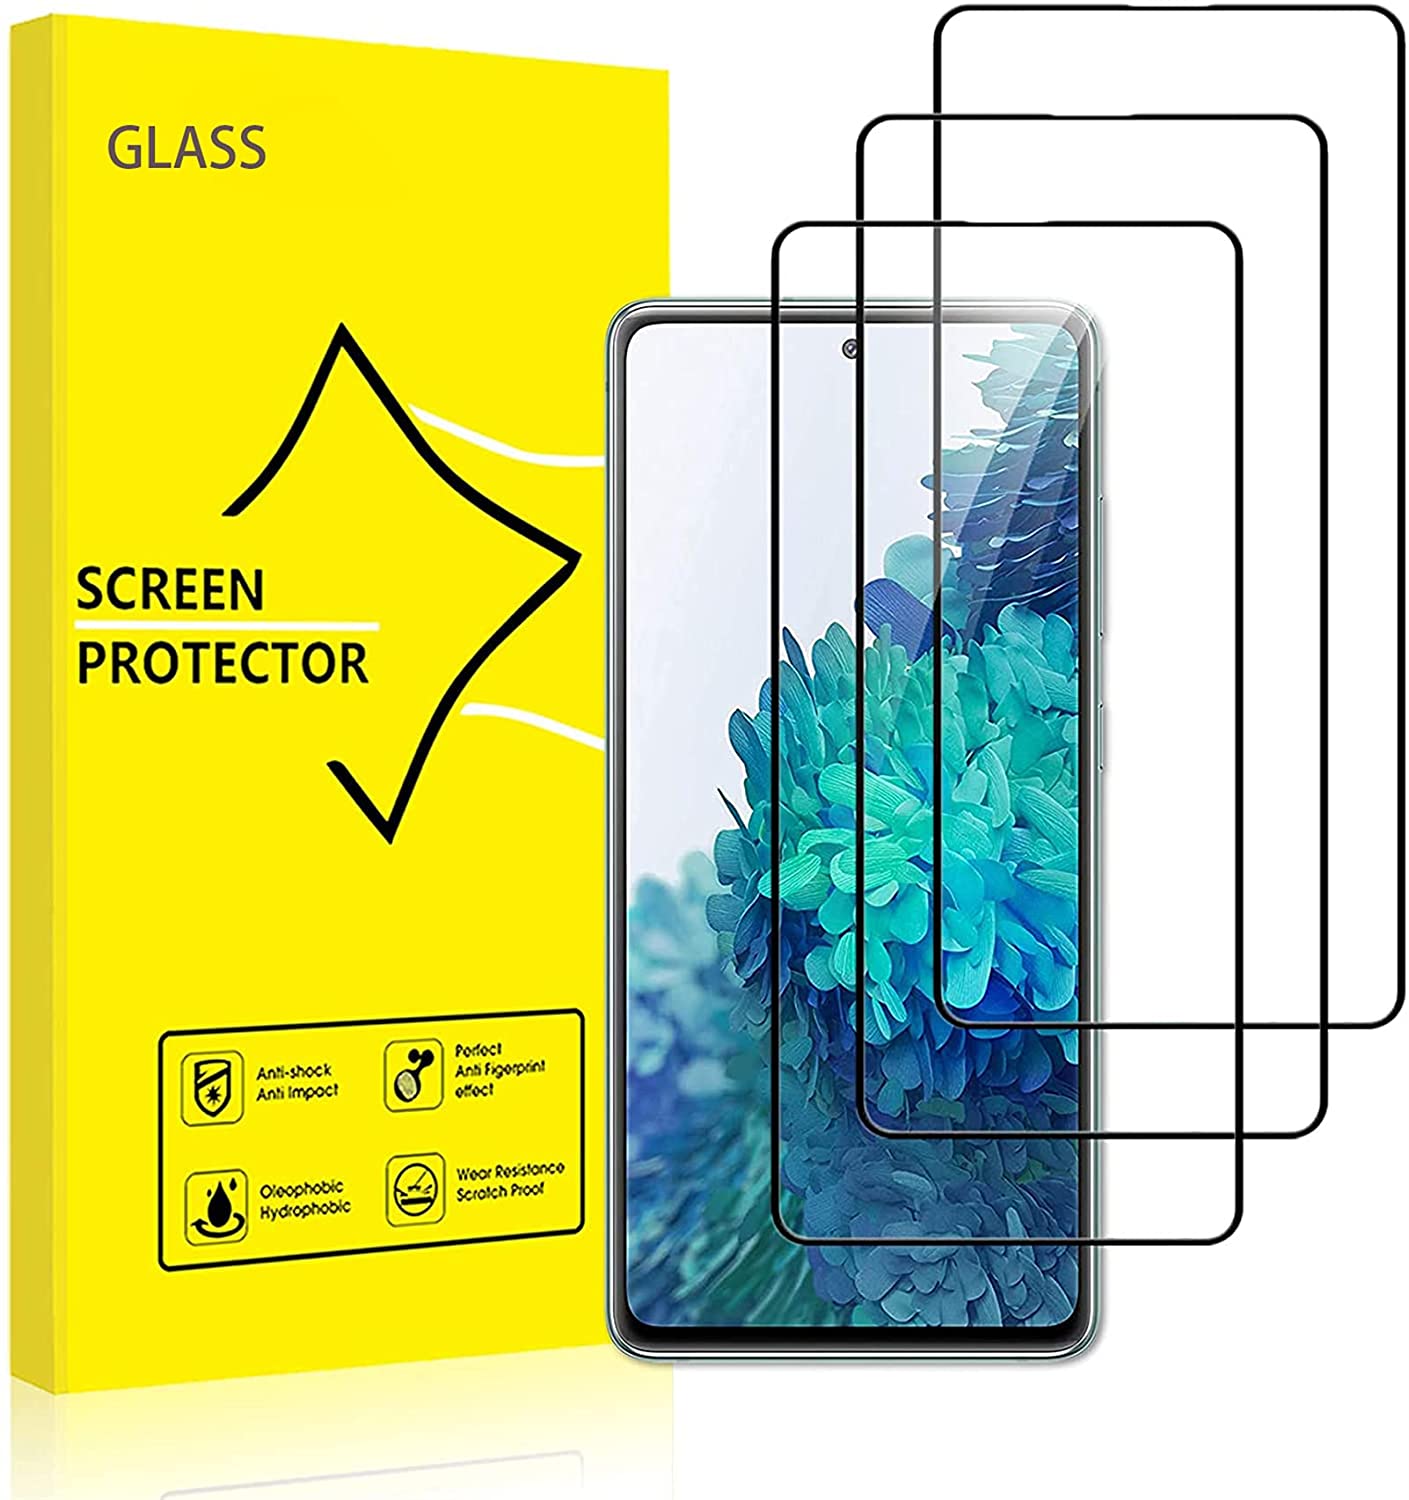 Screen Protector for OPPO Find X3 Lite,Anti-Scratch,High Transparency,Anti-fingerprint,Bubble-Free,Dust-Free Premium Tempered Glass Screen Protector For OPPO Find X3 Lite 2-Pack WFTE